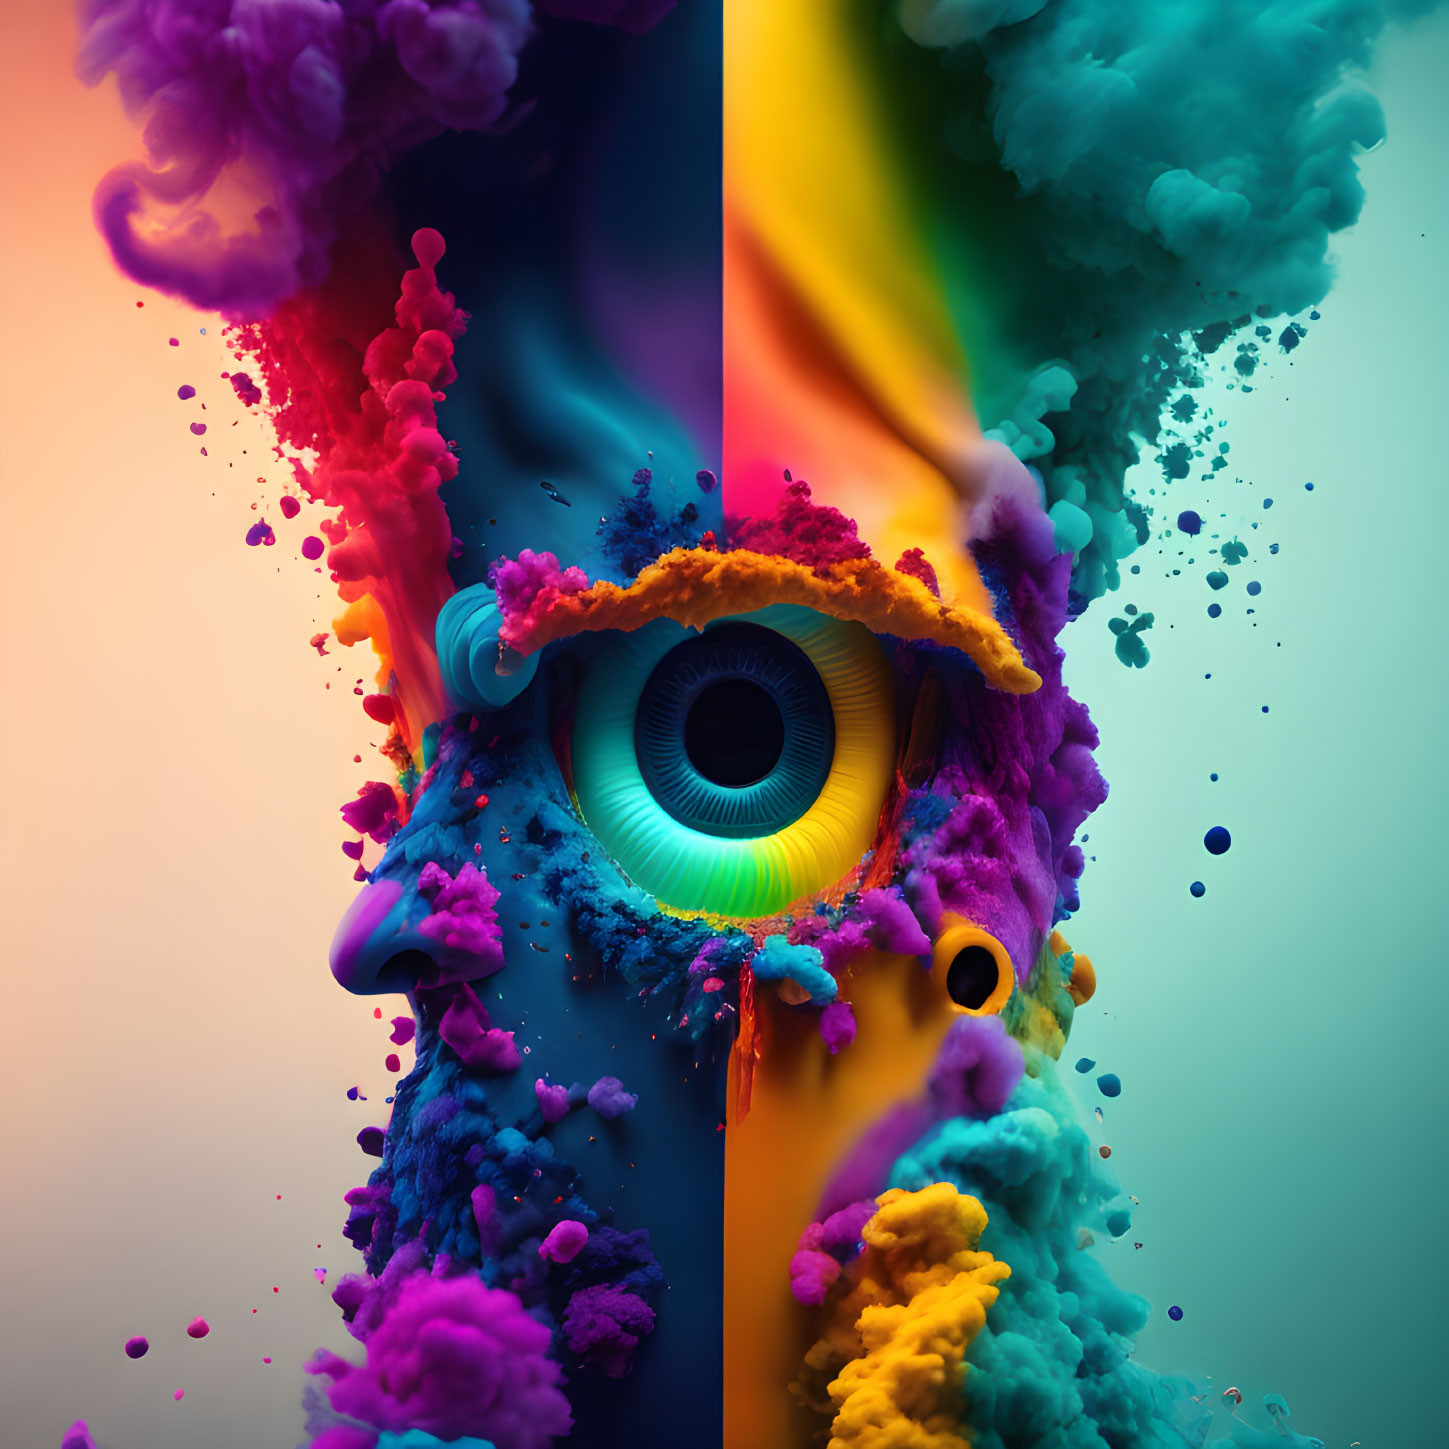 Colorful Abstract Human Face with Central Eye and Rainbow Smoke Swirls